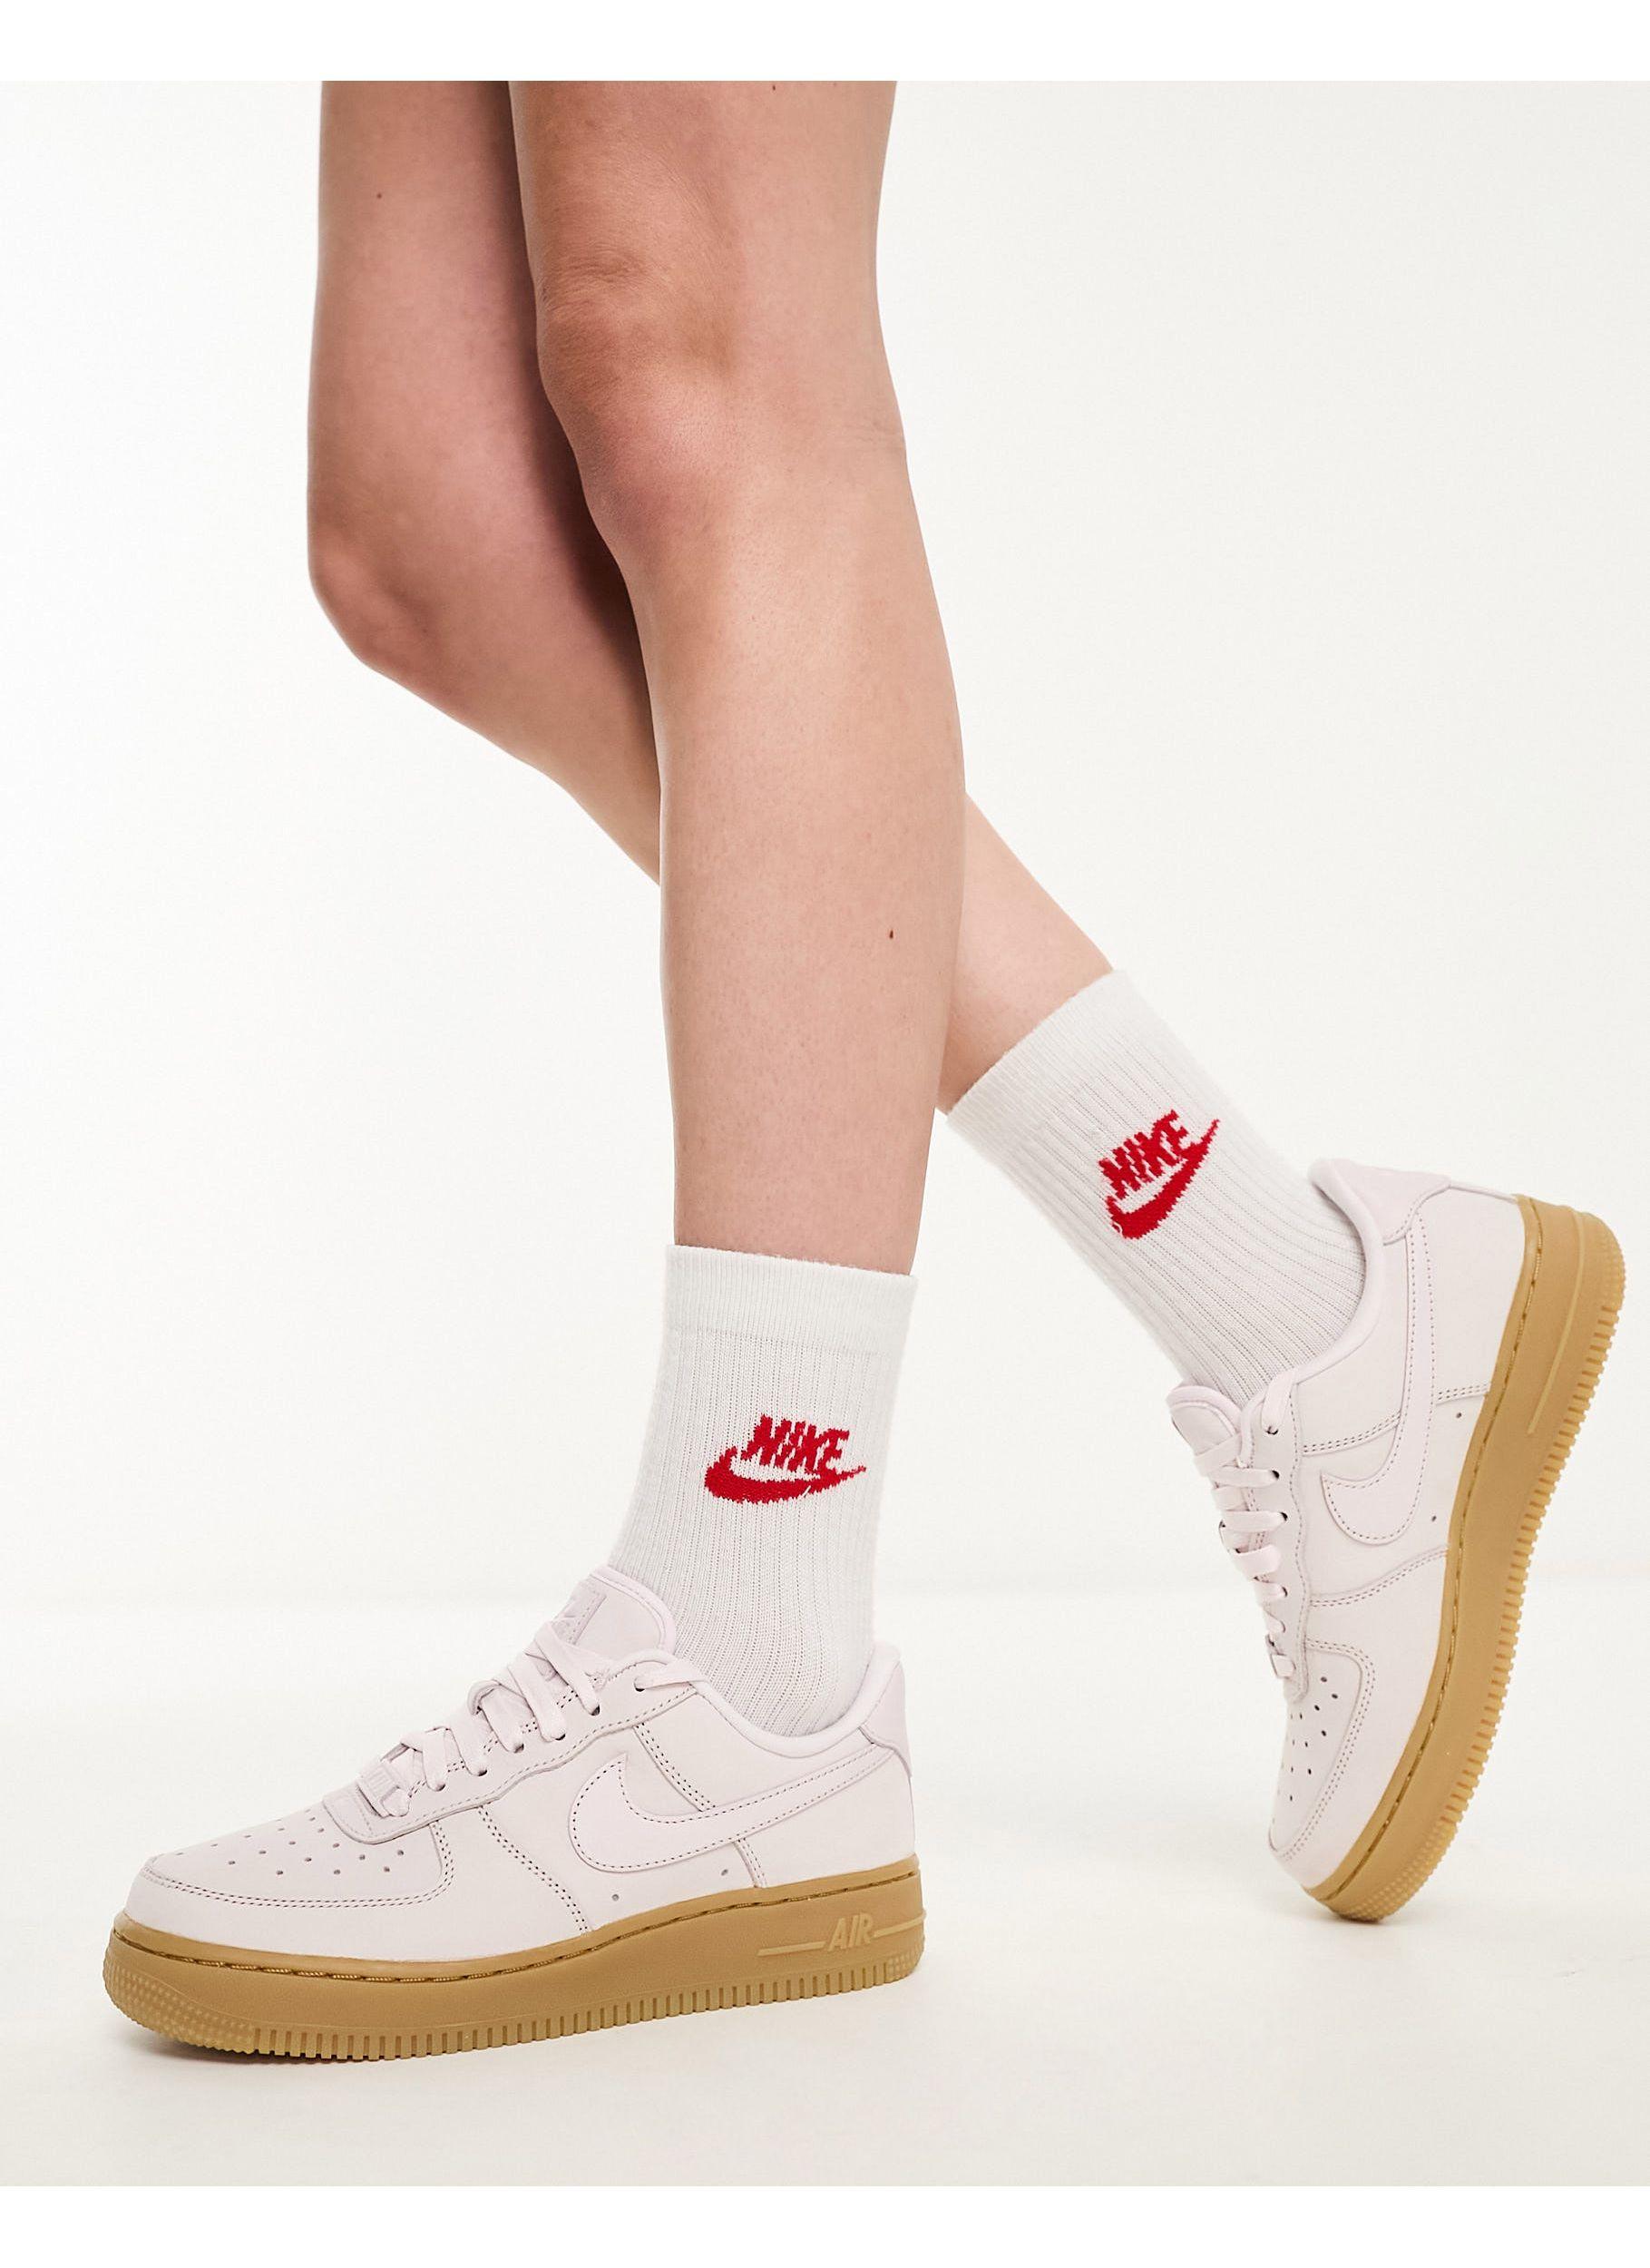 Nike Air Force 1 Prm Sneakers With Gum Sole in White | Lyst